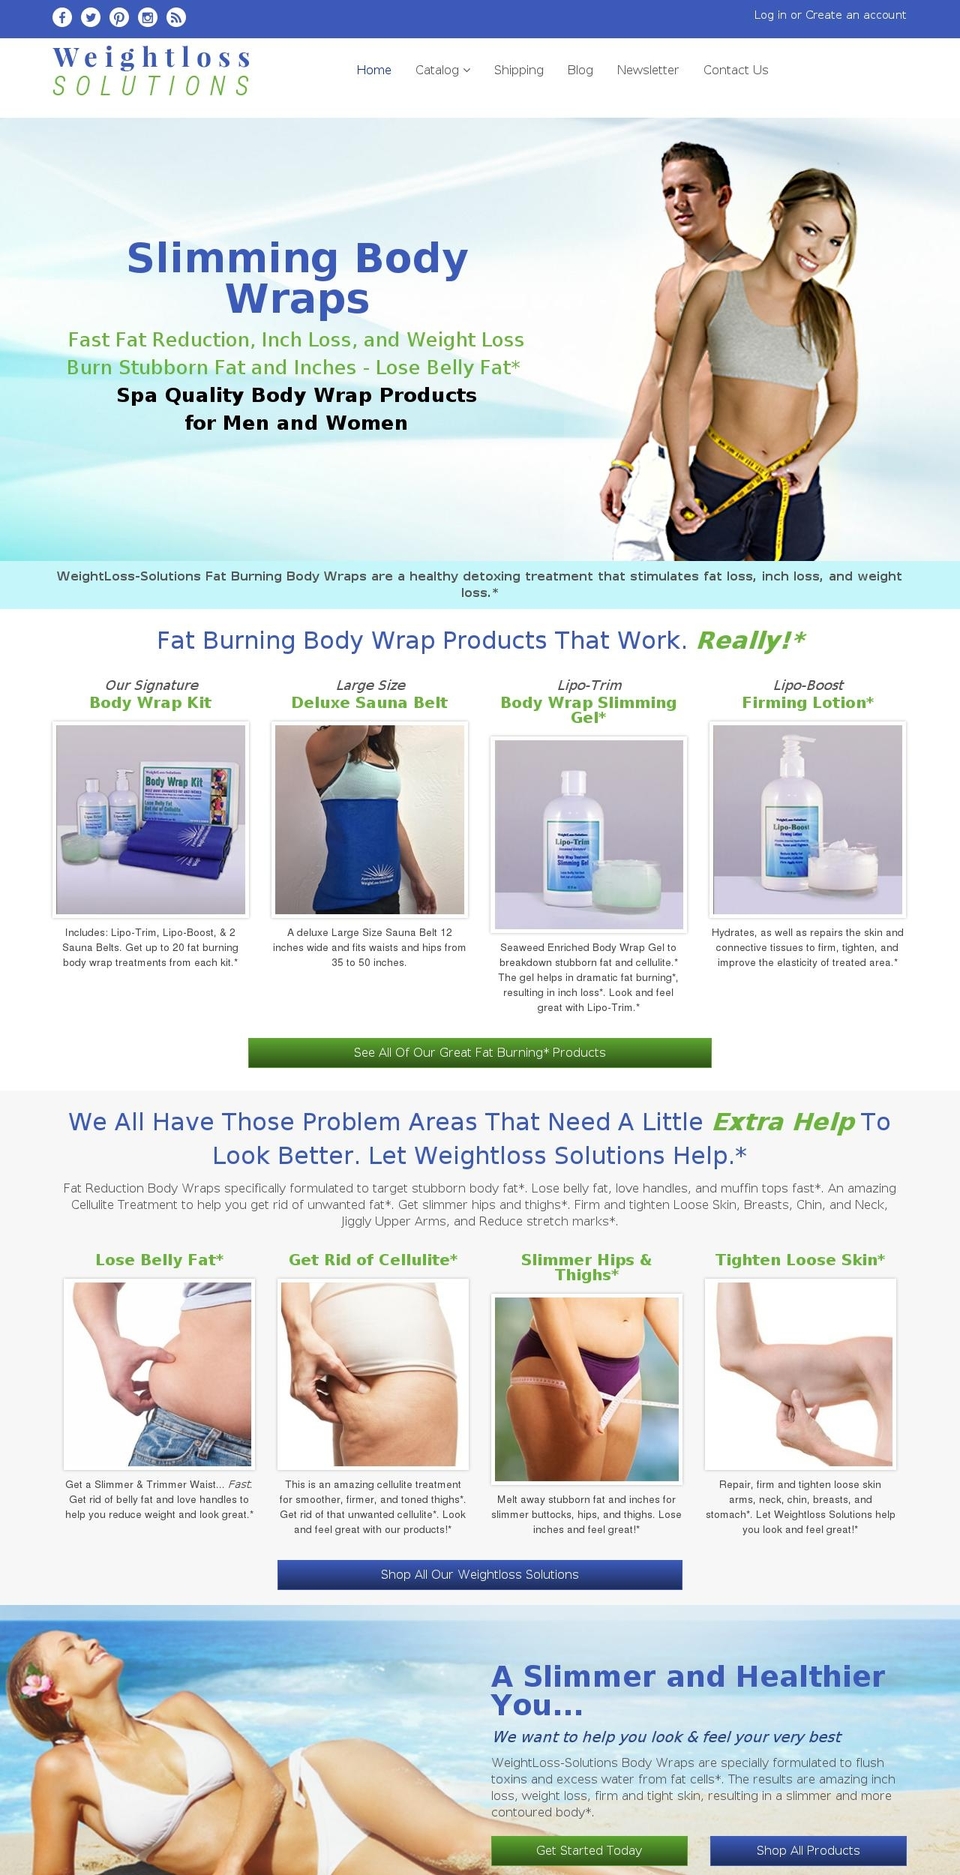 theme-export-weightloss-solutions-build-myshop Shopify theme site example bellyfatwraps.com